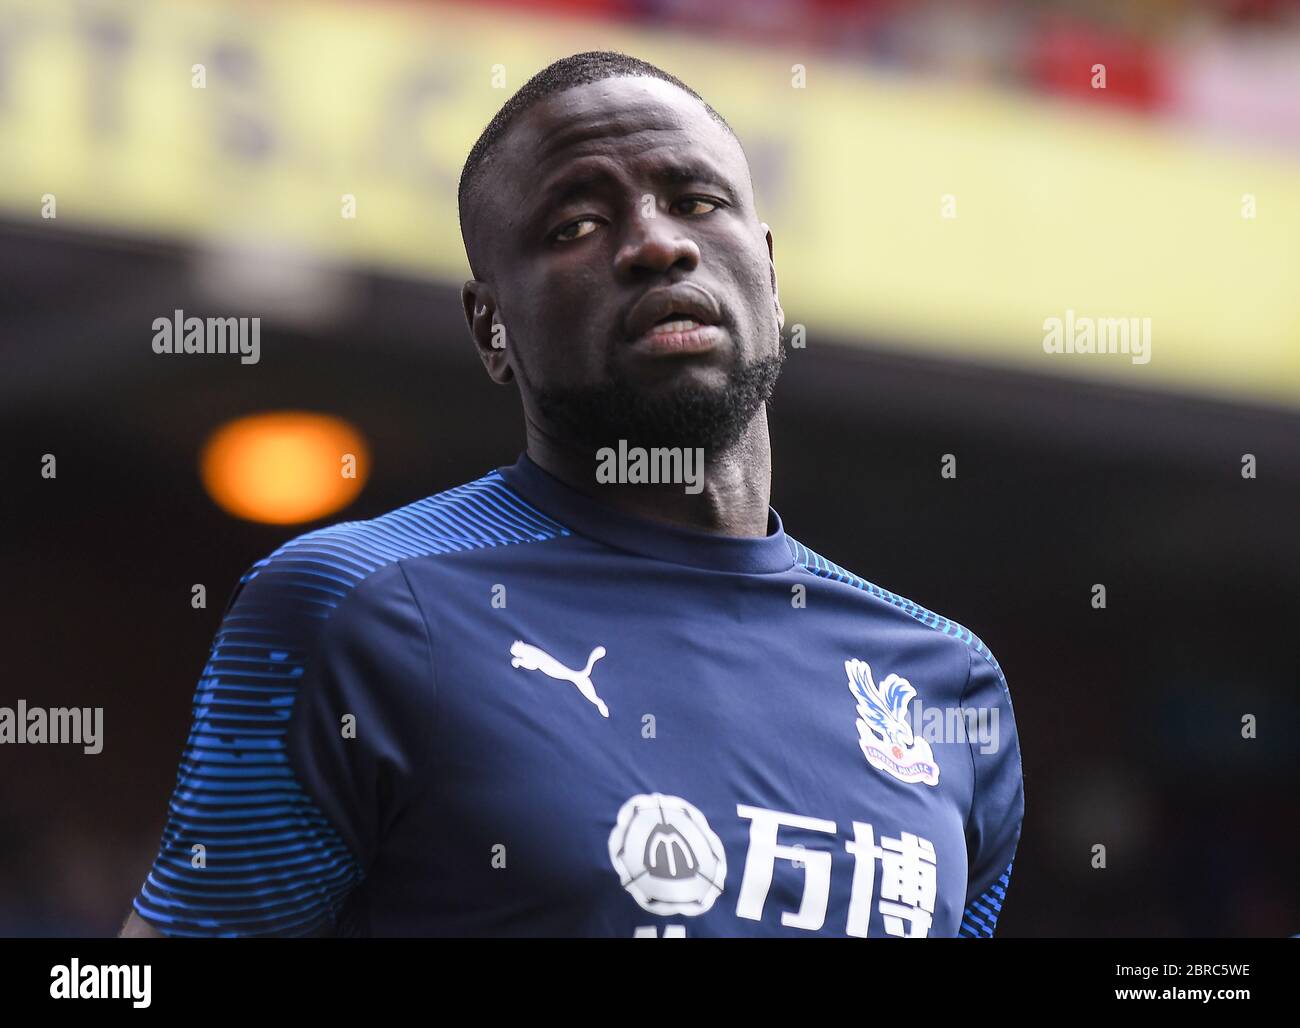 LONDON, ENGLAND - AUGUST 31, 2019: Cheikhou Kouyate of Palace pictured ahead of  the 2019/20 Premier League game between Crystal Palace FC and Aston Villa FC at Selhurst Park. Stock Photo